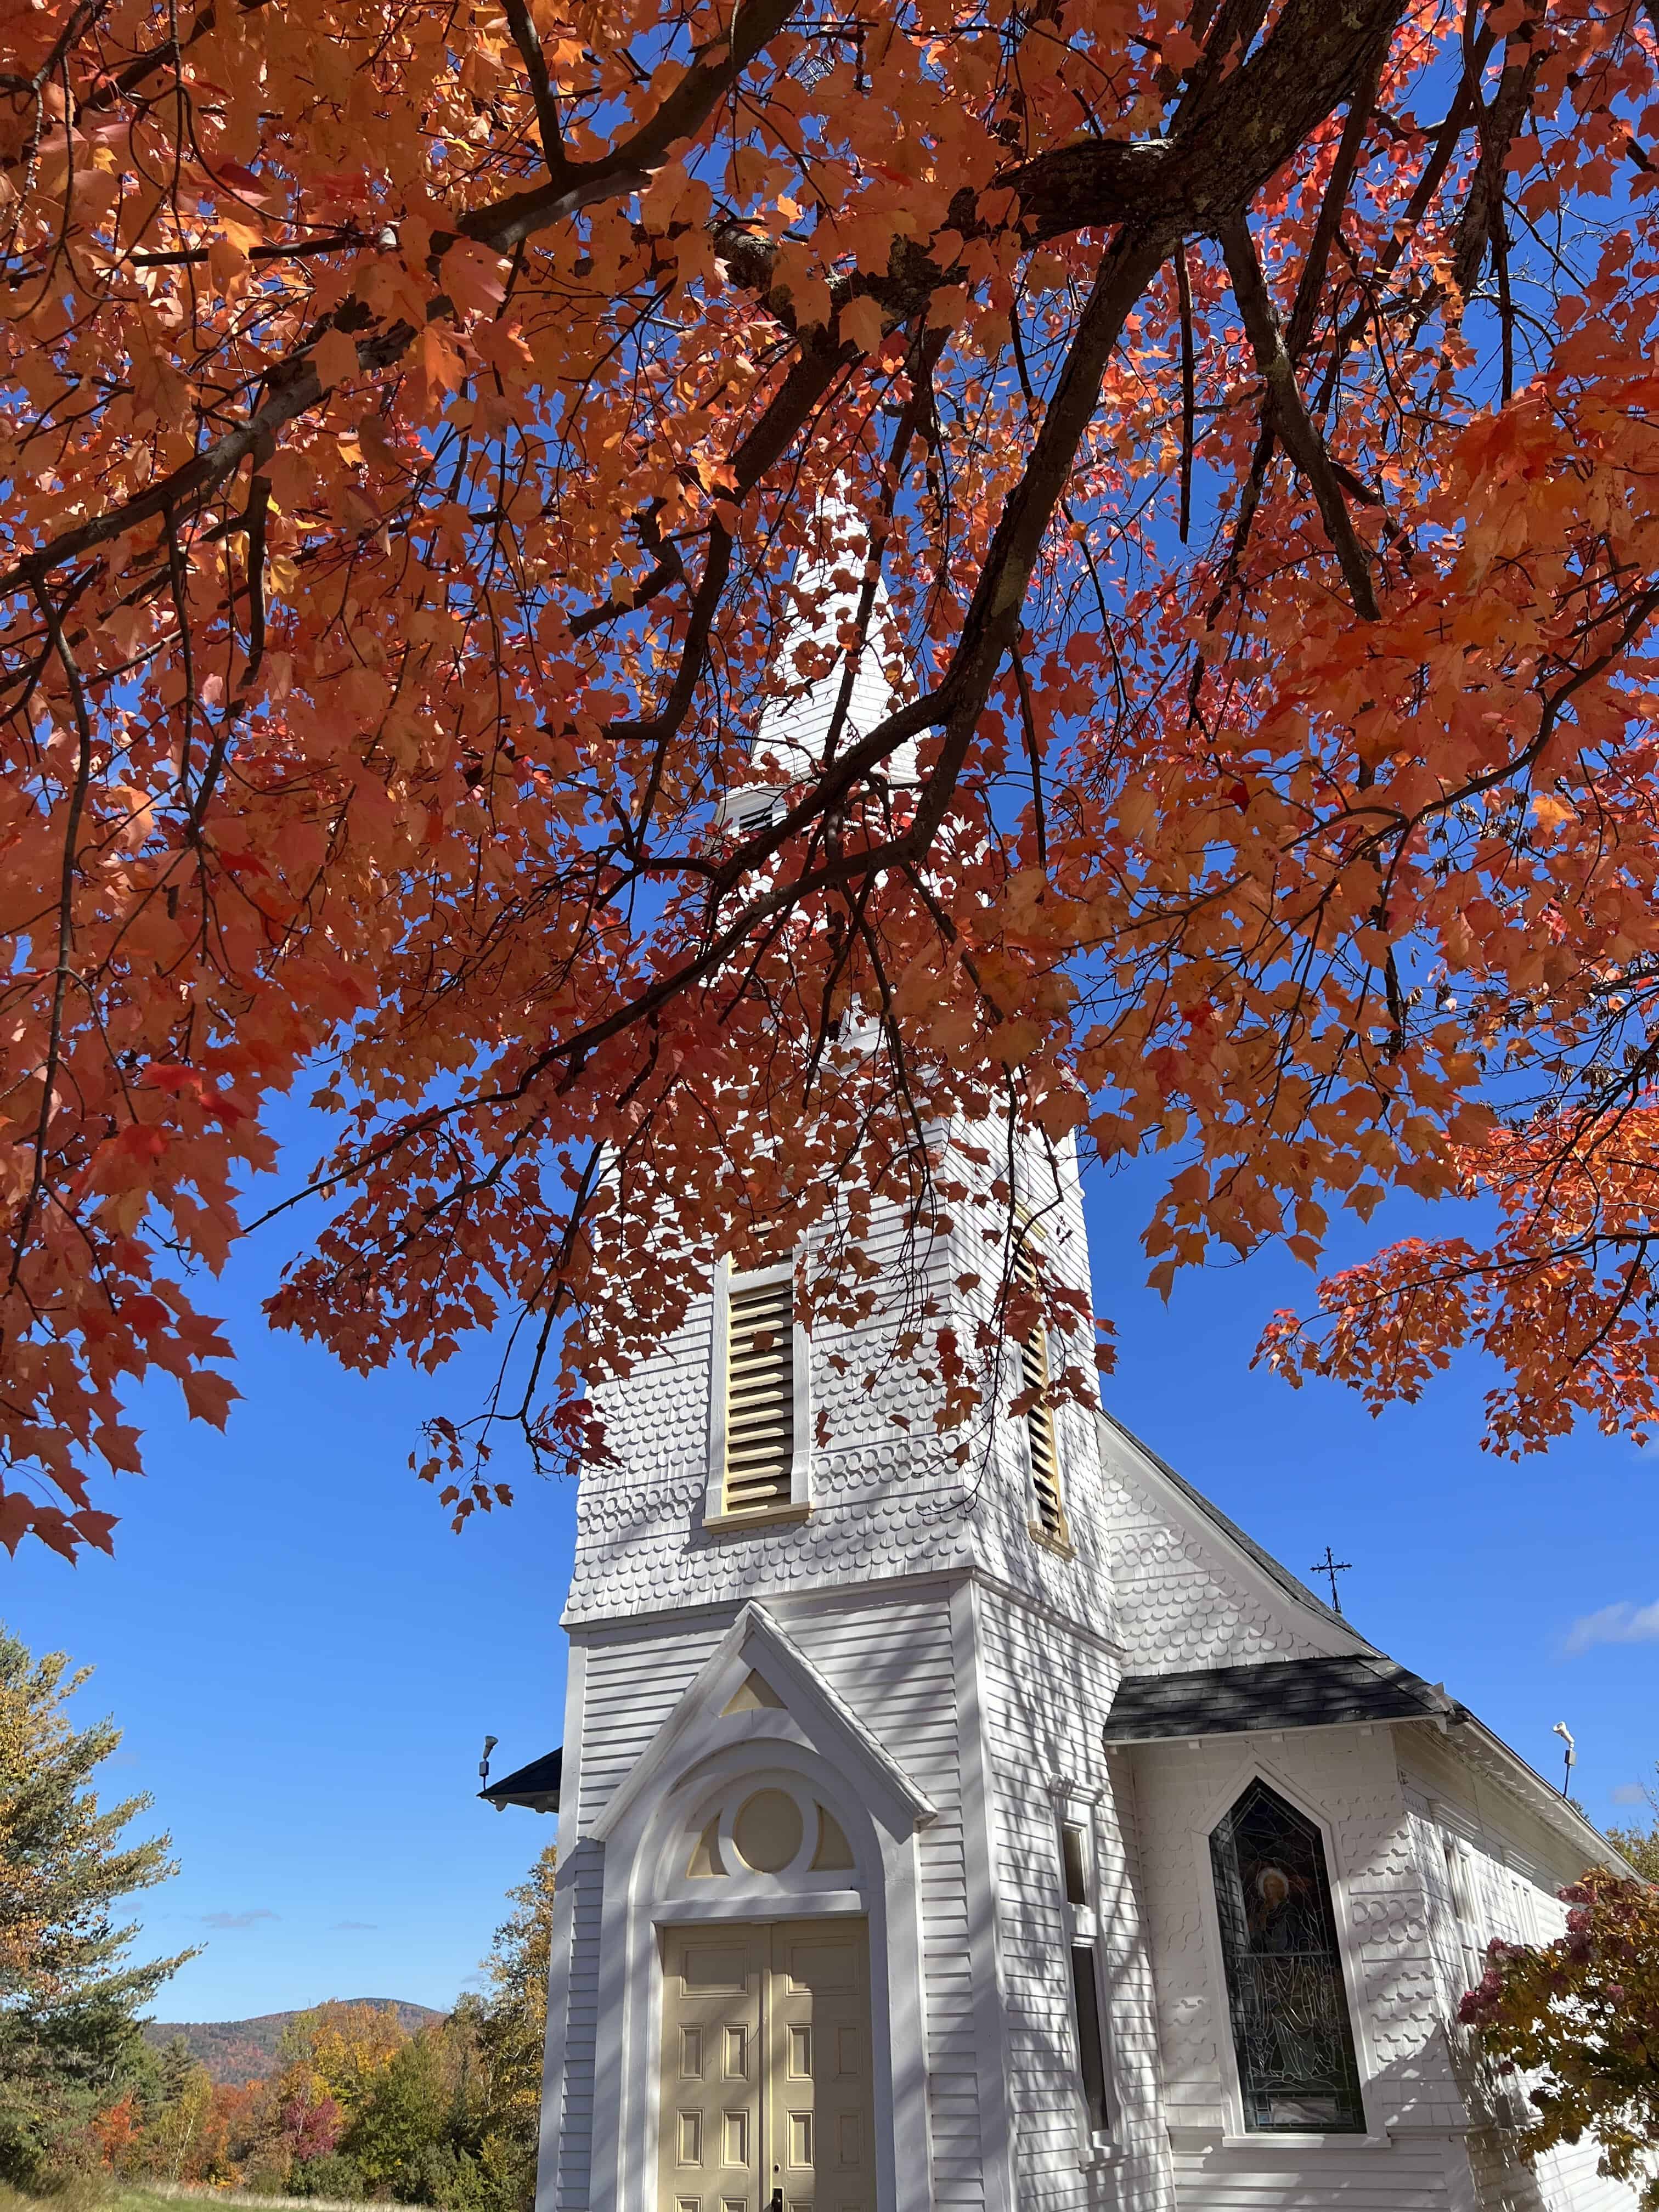 a narrow, white steepled church seen behind a branch of fall foliage